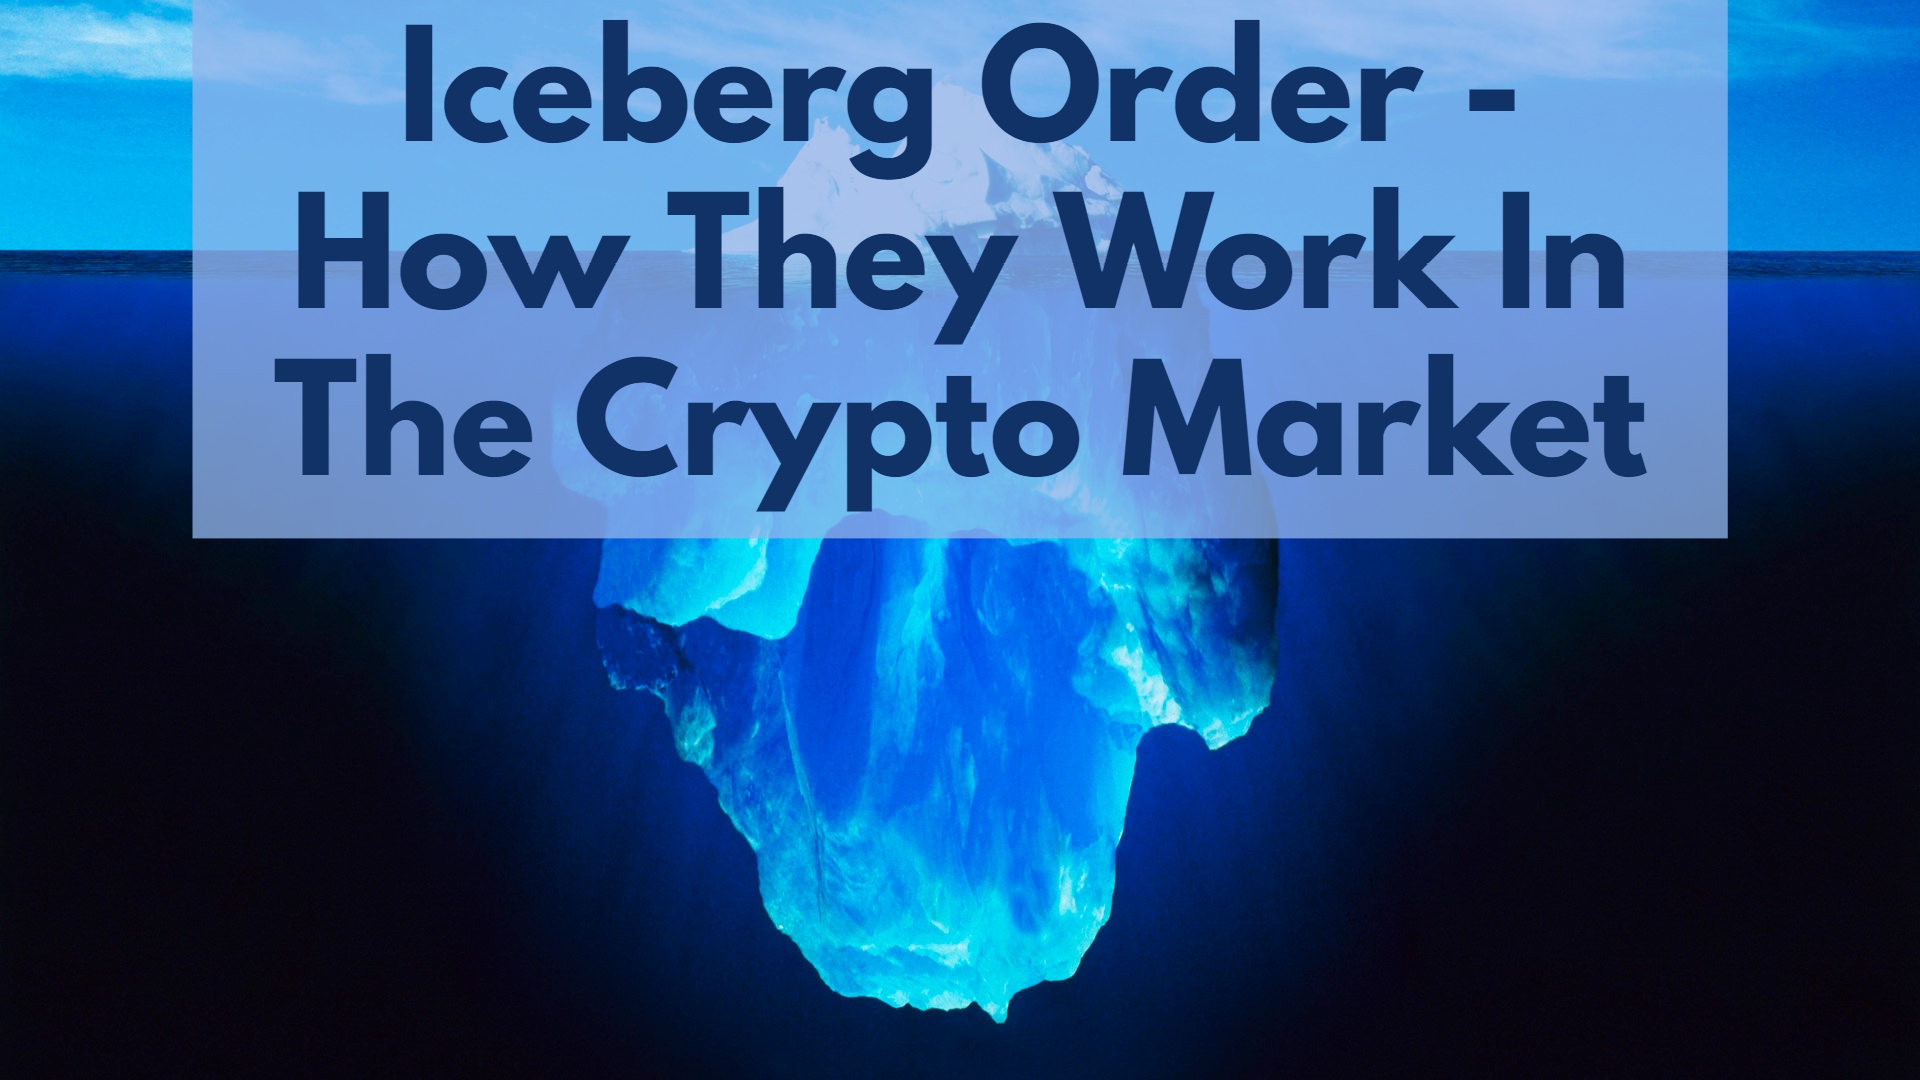 Iceberg Order - How They Work In The Crypto Market?